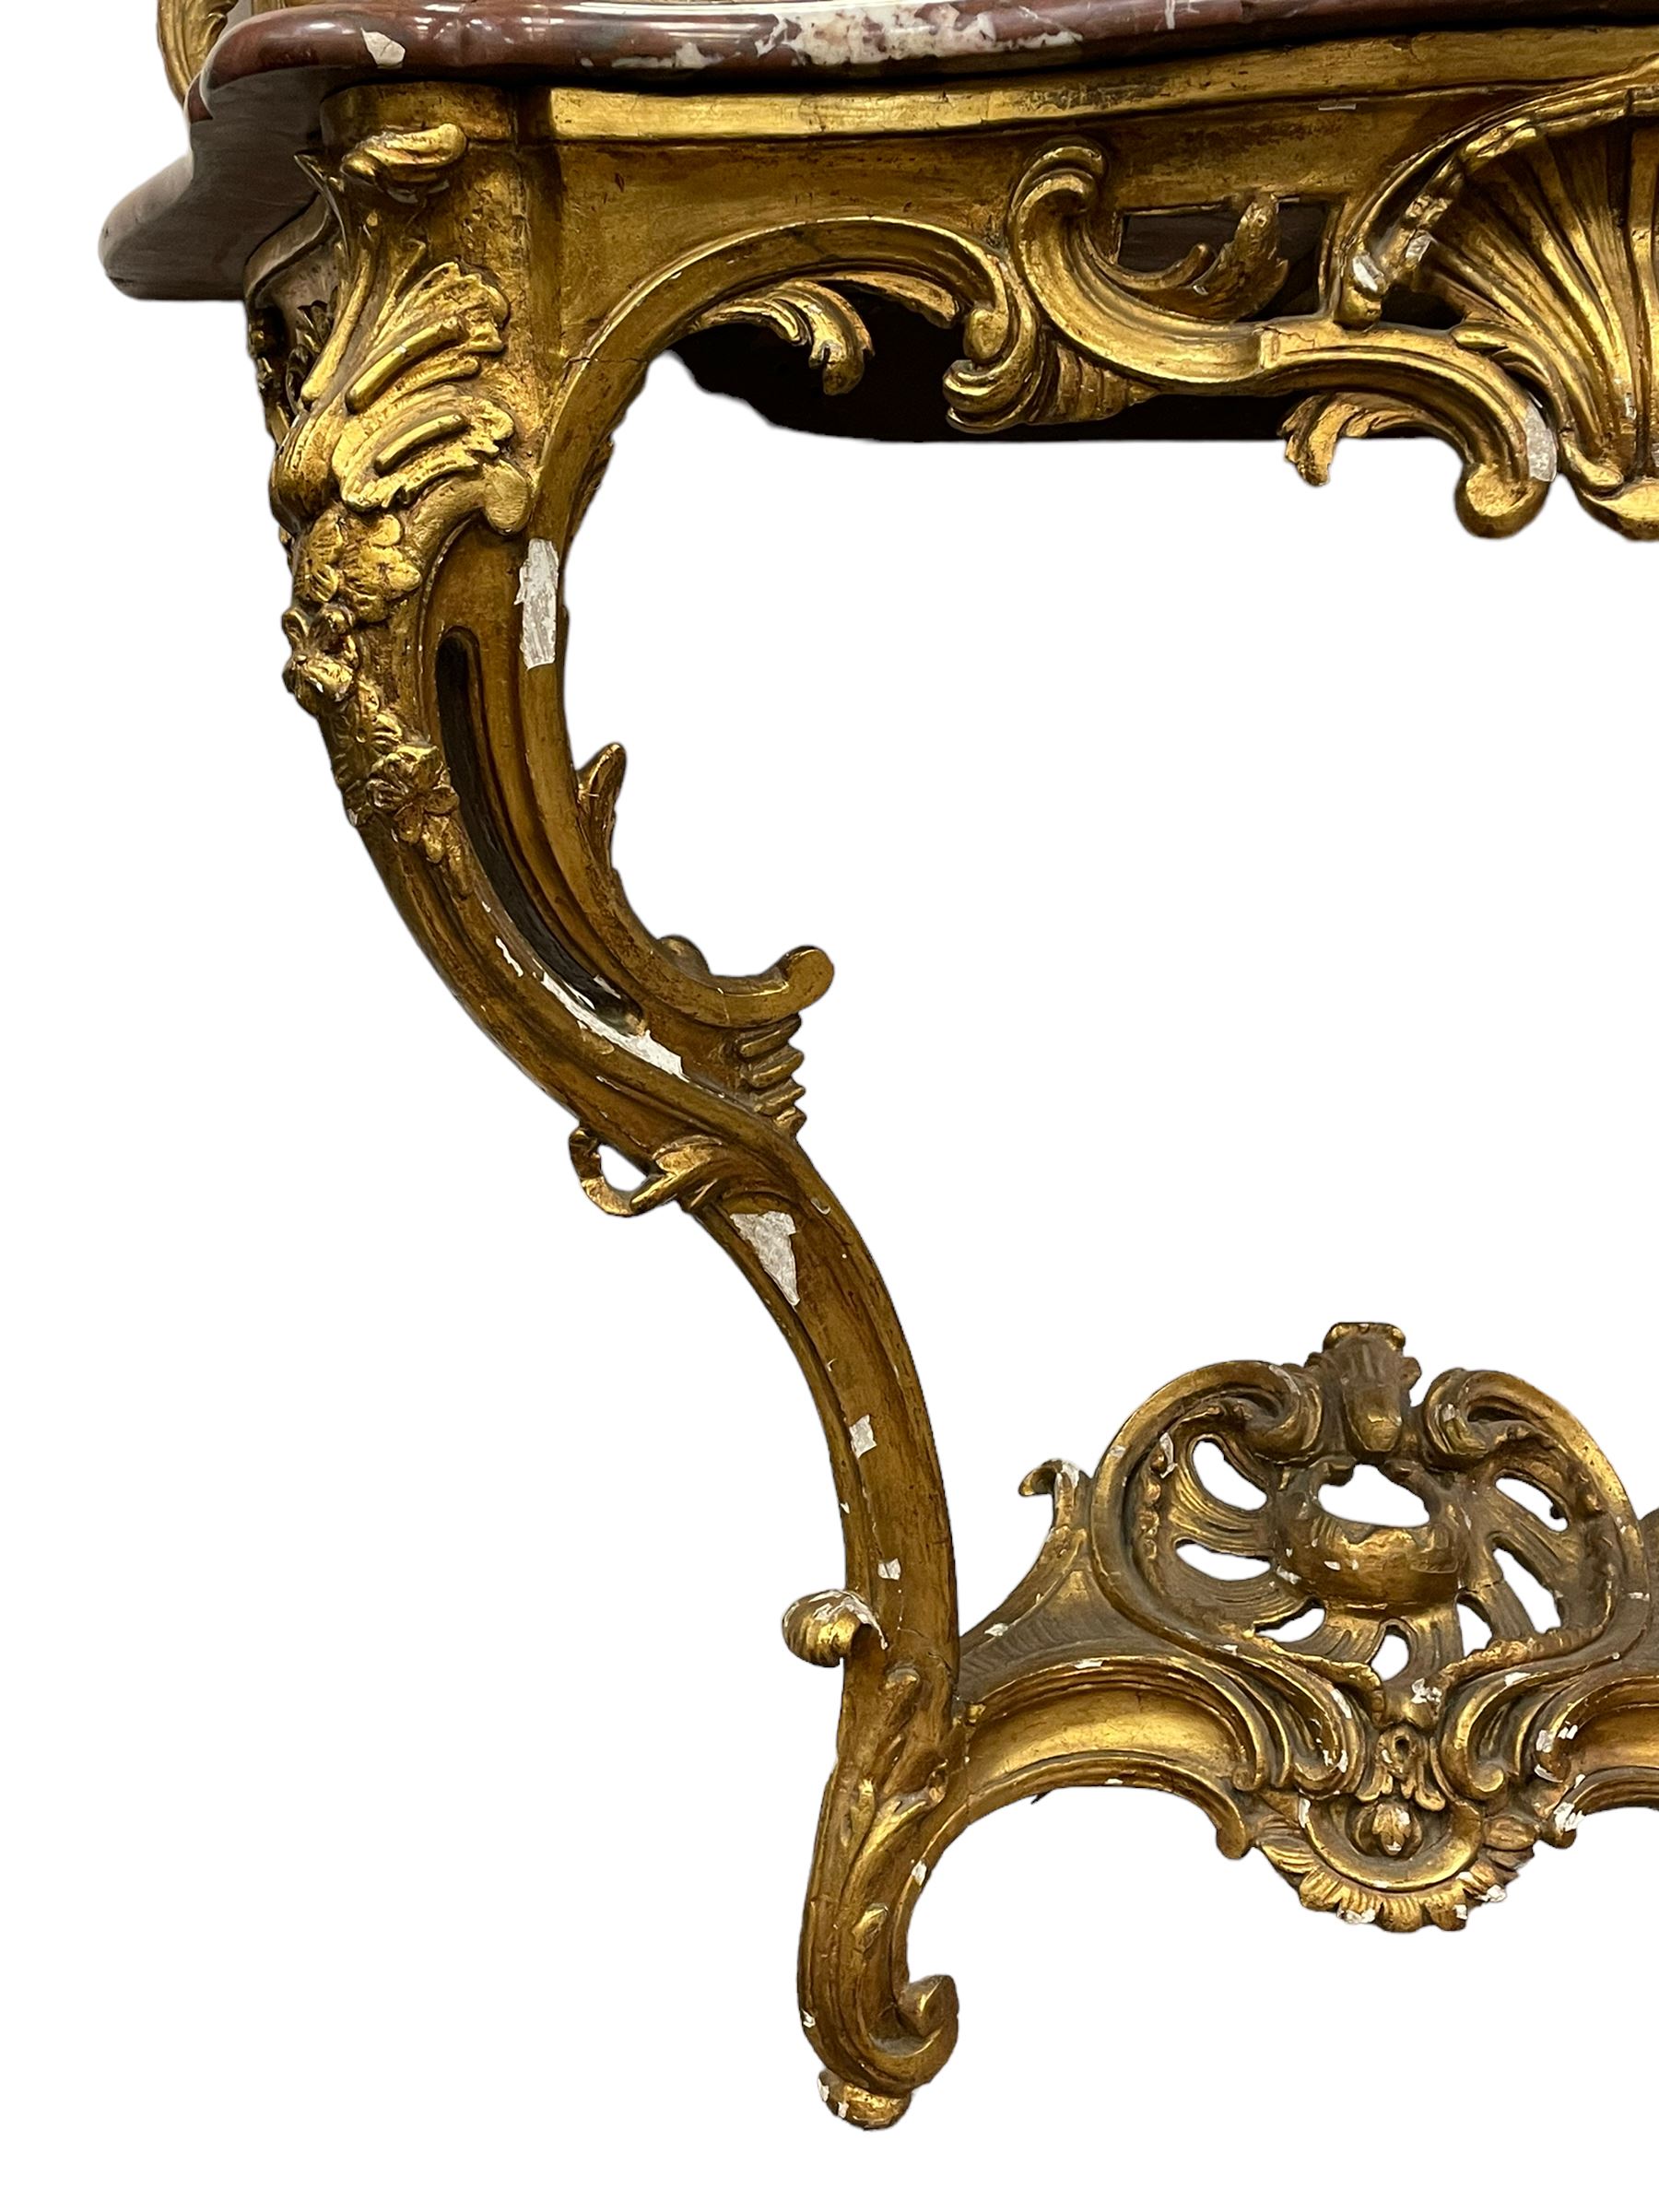 19th century giltwood and gesso console table and mirror - Image 2 of 12